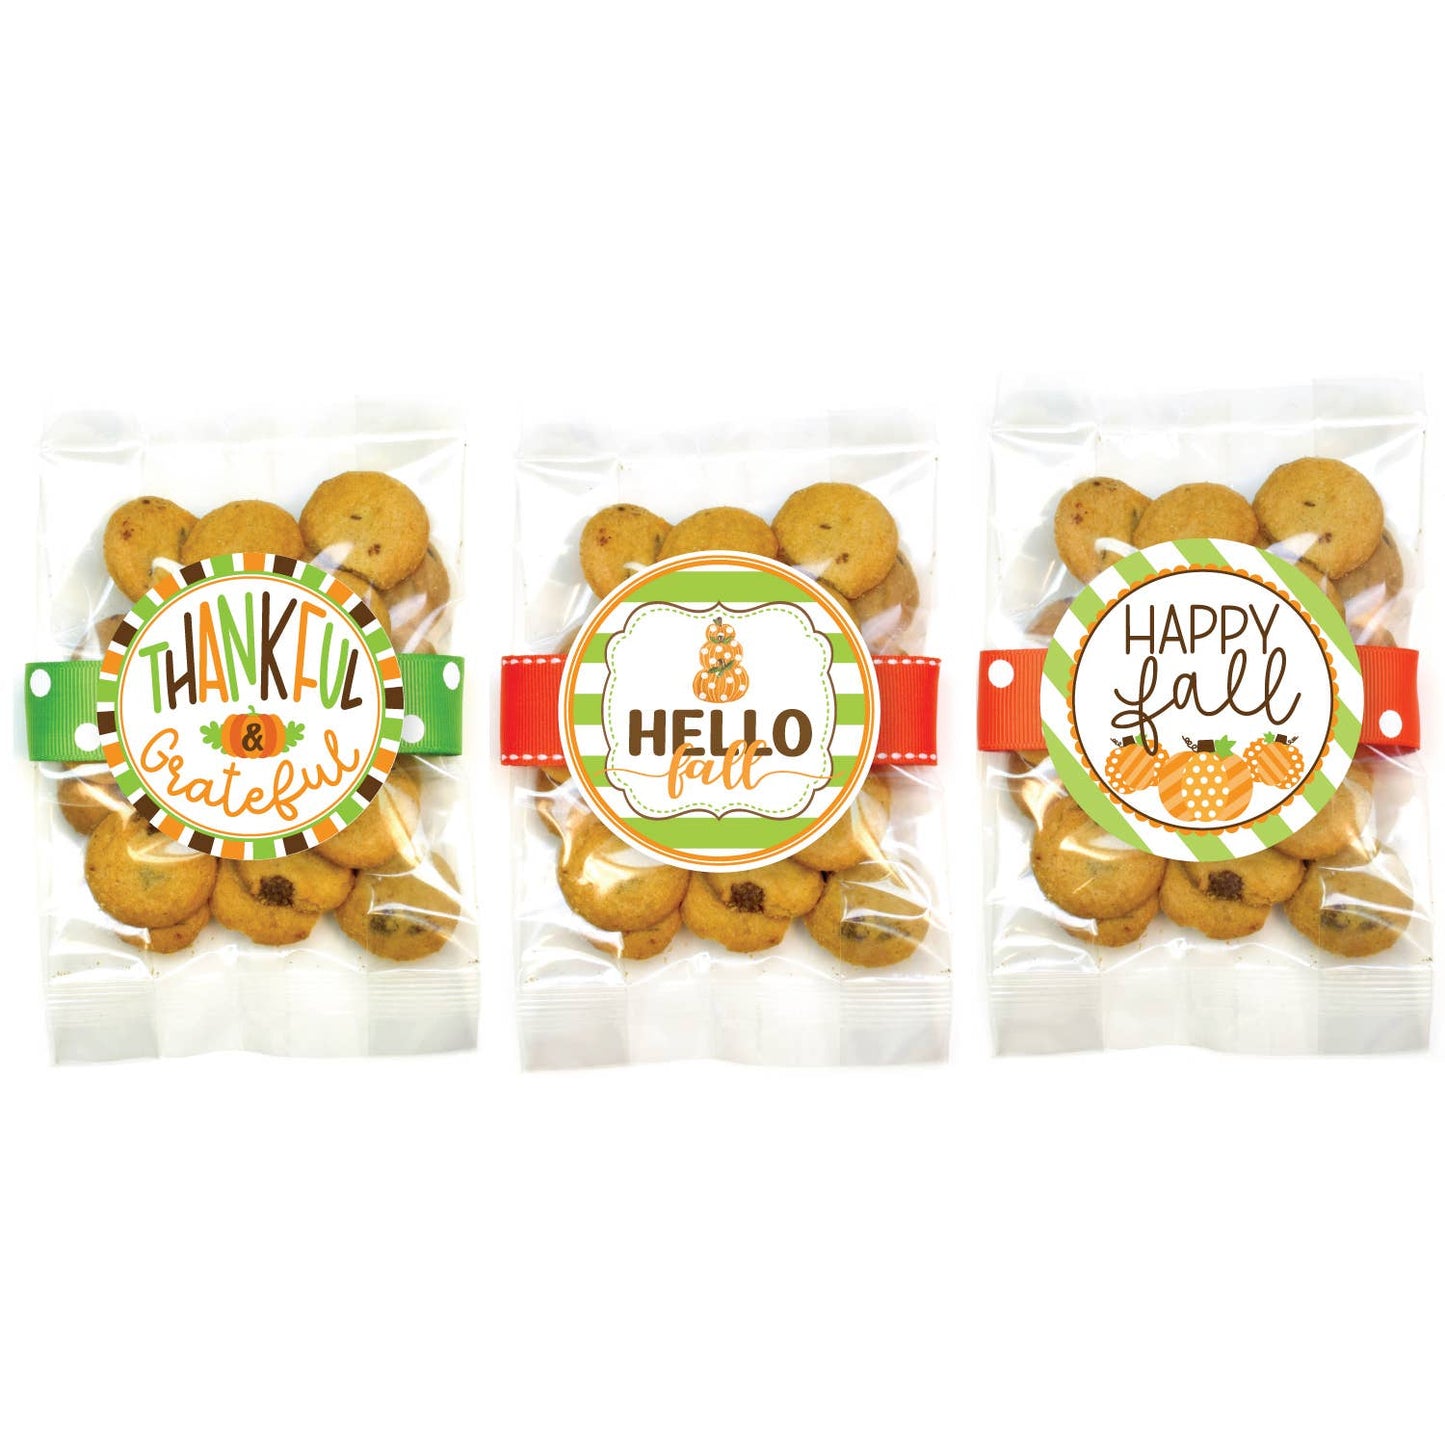 Oh, Sugar! - Cookies - Fall Small Cookie Bag Asst #2